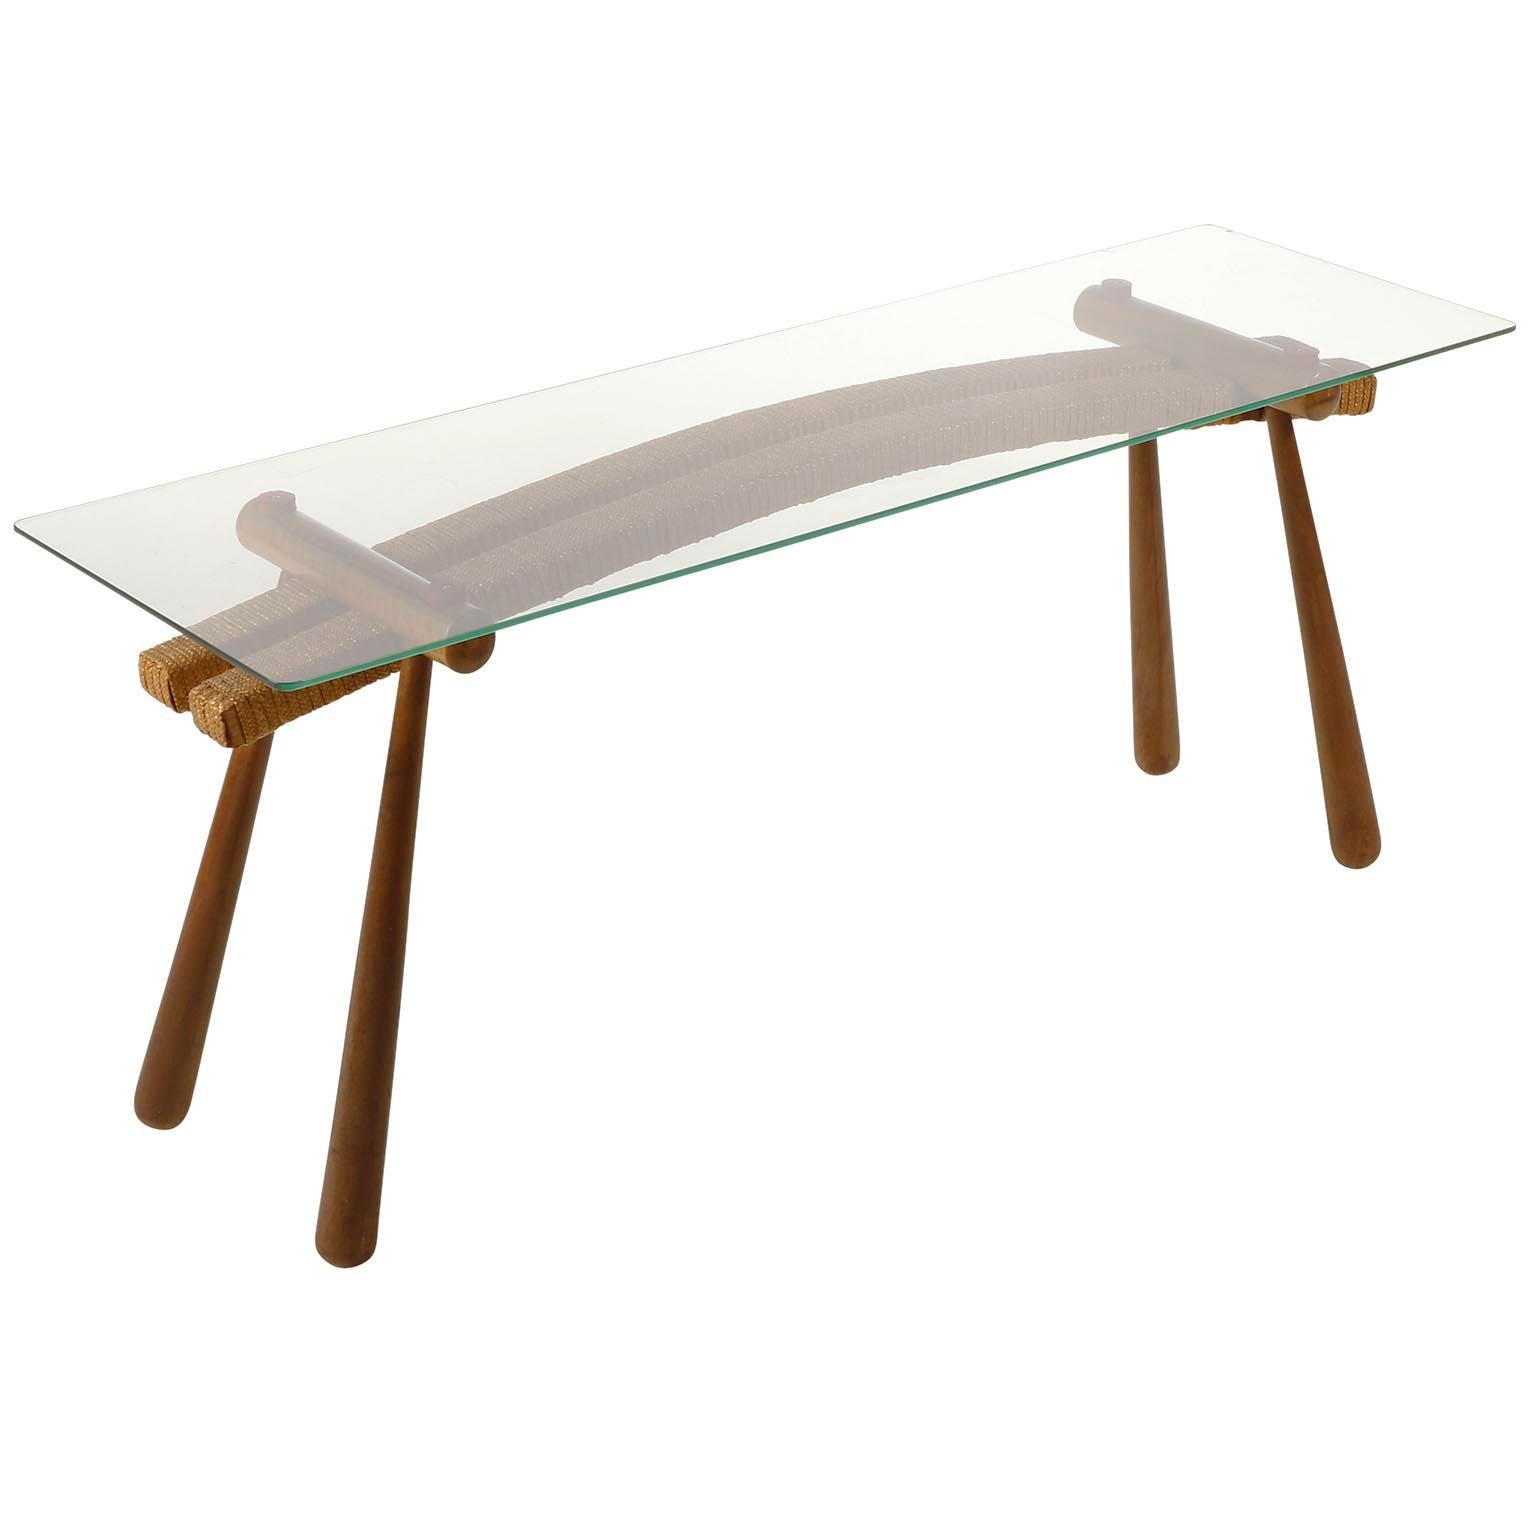 A coffee or side table designed by Austrian architect Max Kment and manufactured by Max Kment Kunstgewerbliche Werkstätten, Vienna, circa 1950.
This is a large version of this kind of tables. The organic shaped base is made of beech wood which is